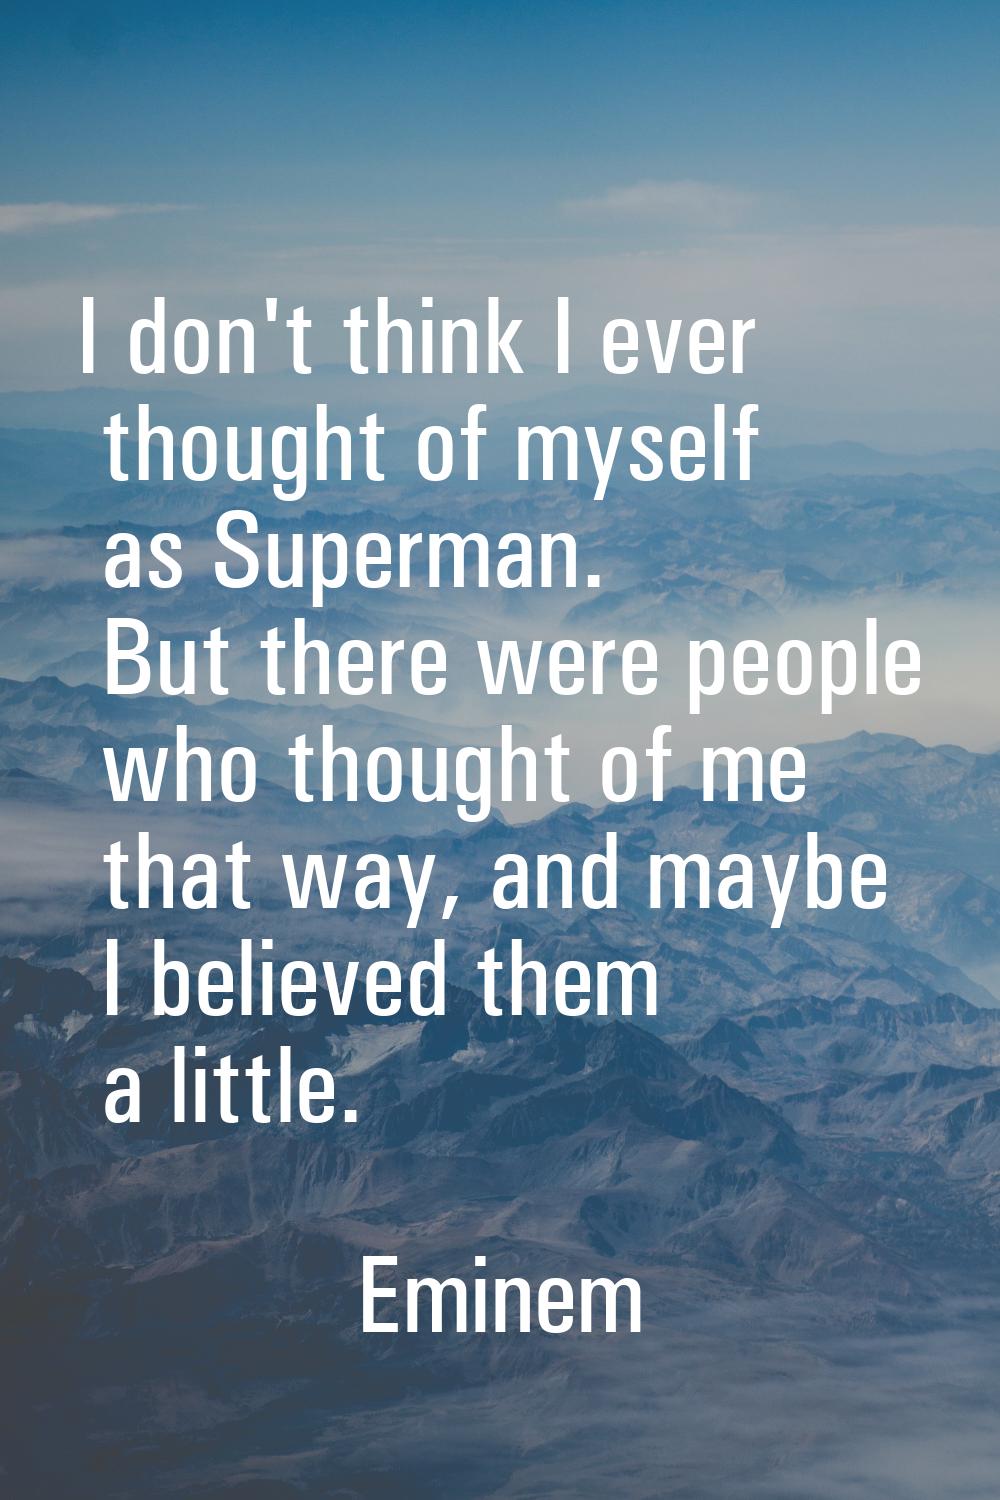 I don't think I ever thought of myself as Superman. But there were people who thought of me that wa